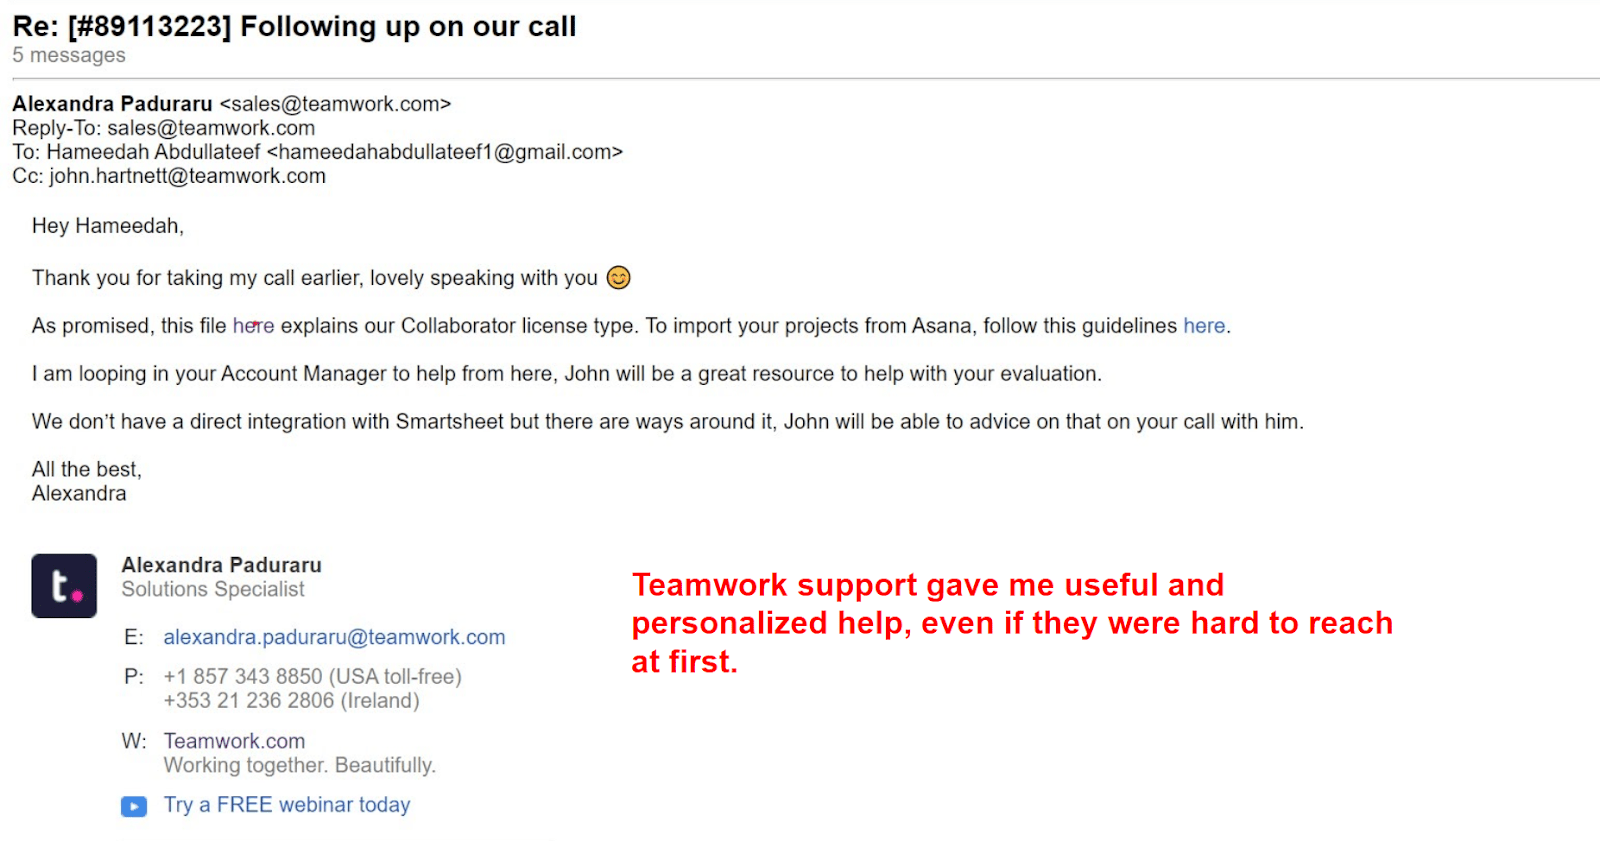 email-from-teamwork-support